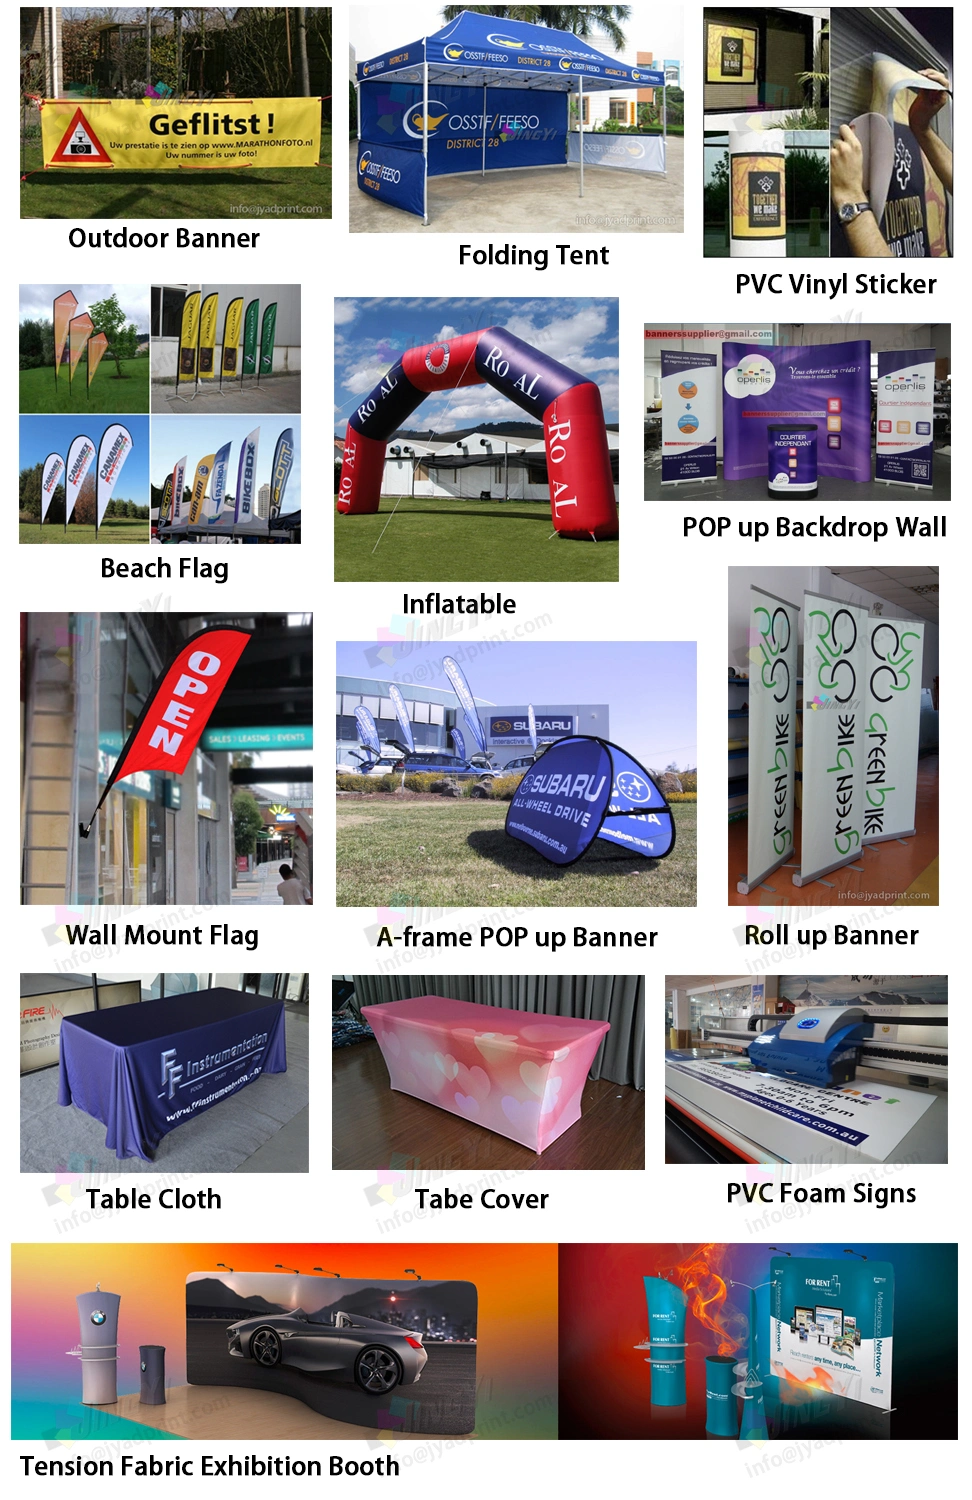 Custom Waterproof Recyclable Folding Promotion Canopy Tent For Sale